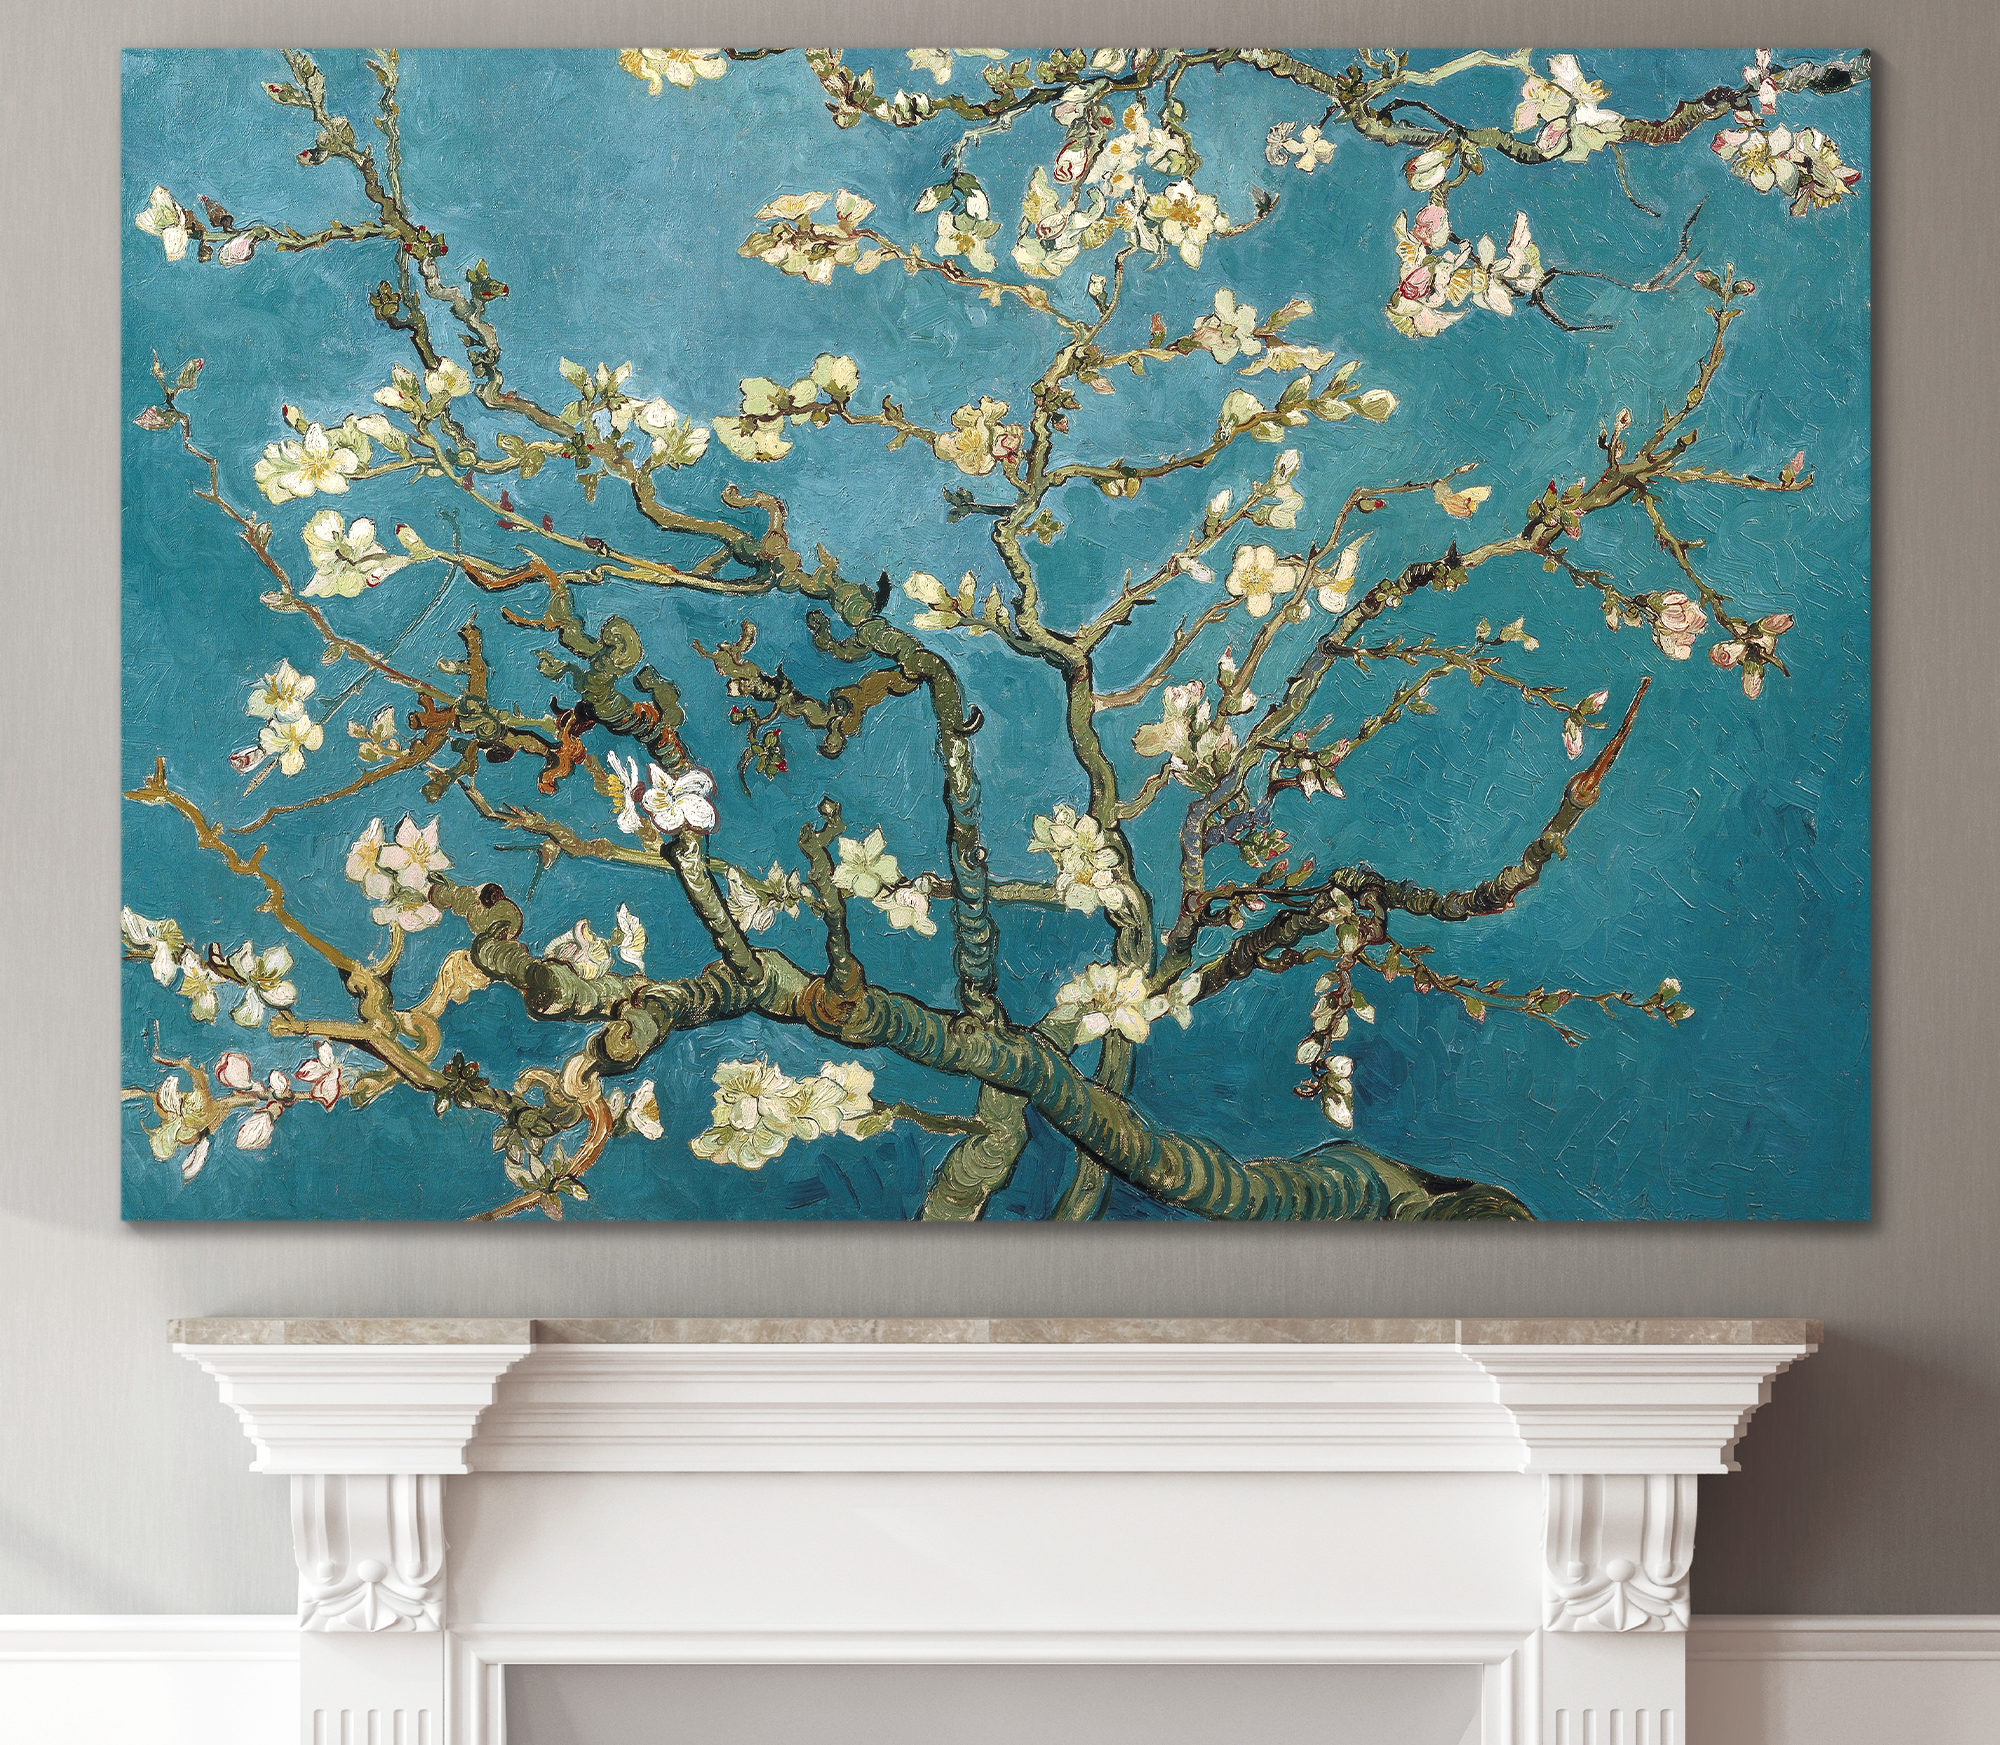 almond blossoms in 3 panels over a fireplace